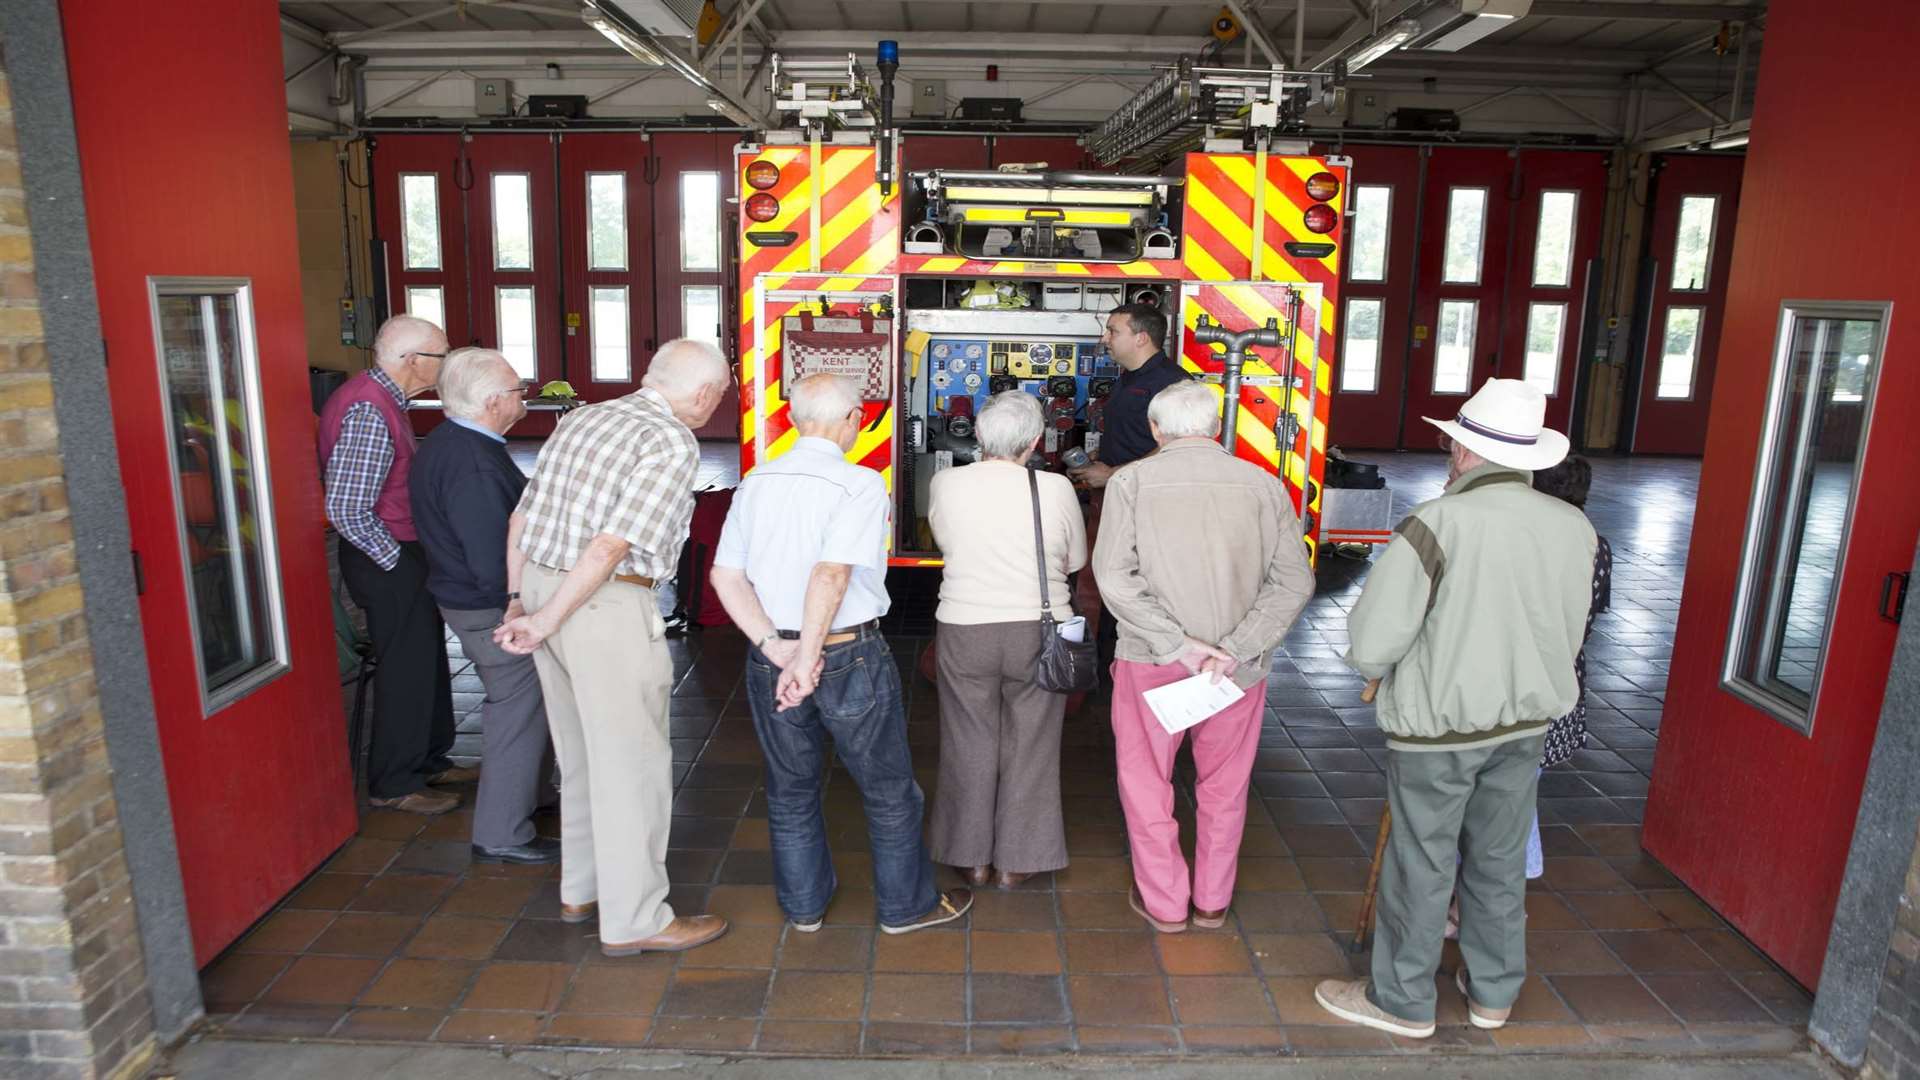 Crews spent a morning talking to the group about their work and showing them the equipment they use to keep people safe